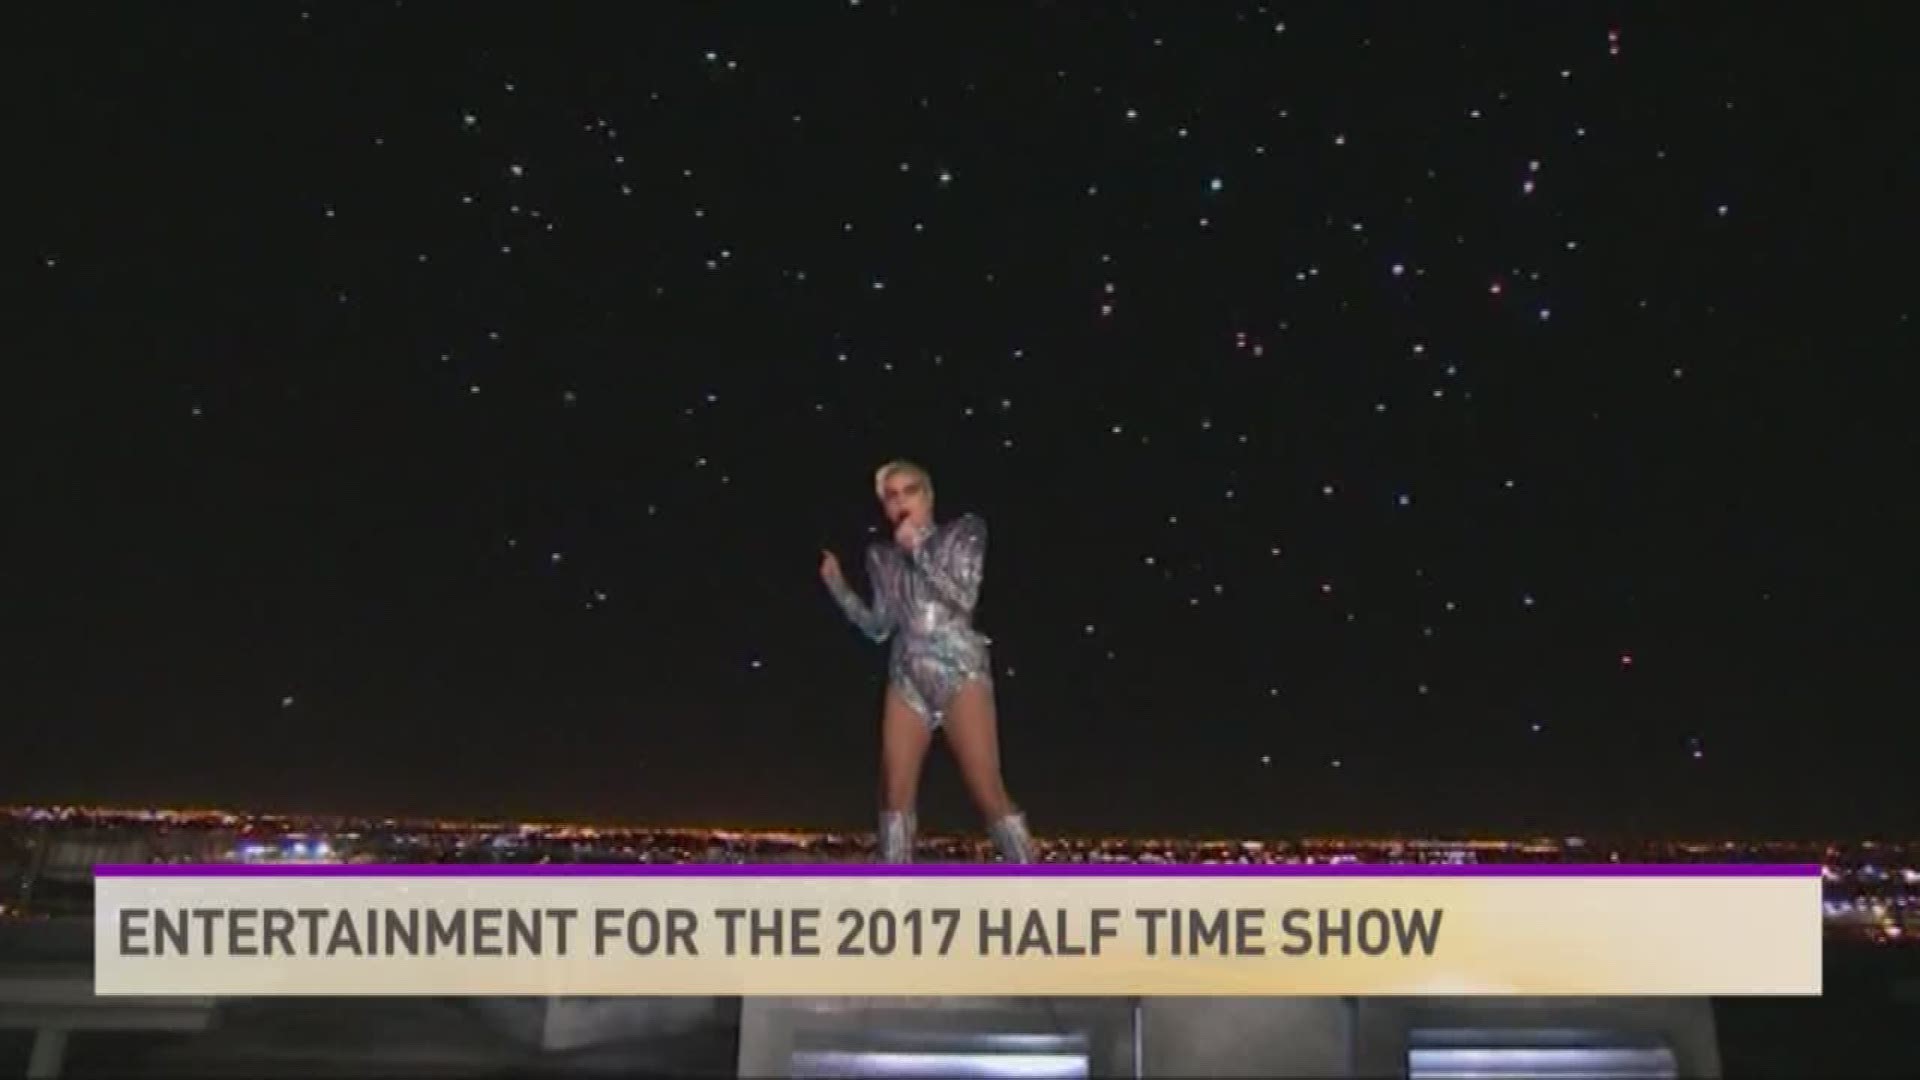 The entertainment at the Super Bowl was top notch, especially Sunday's half-time show with Lady Gaga.